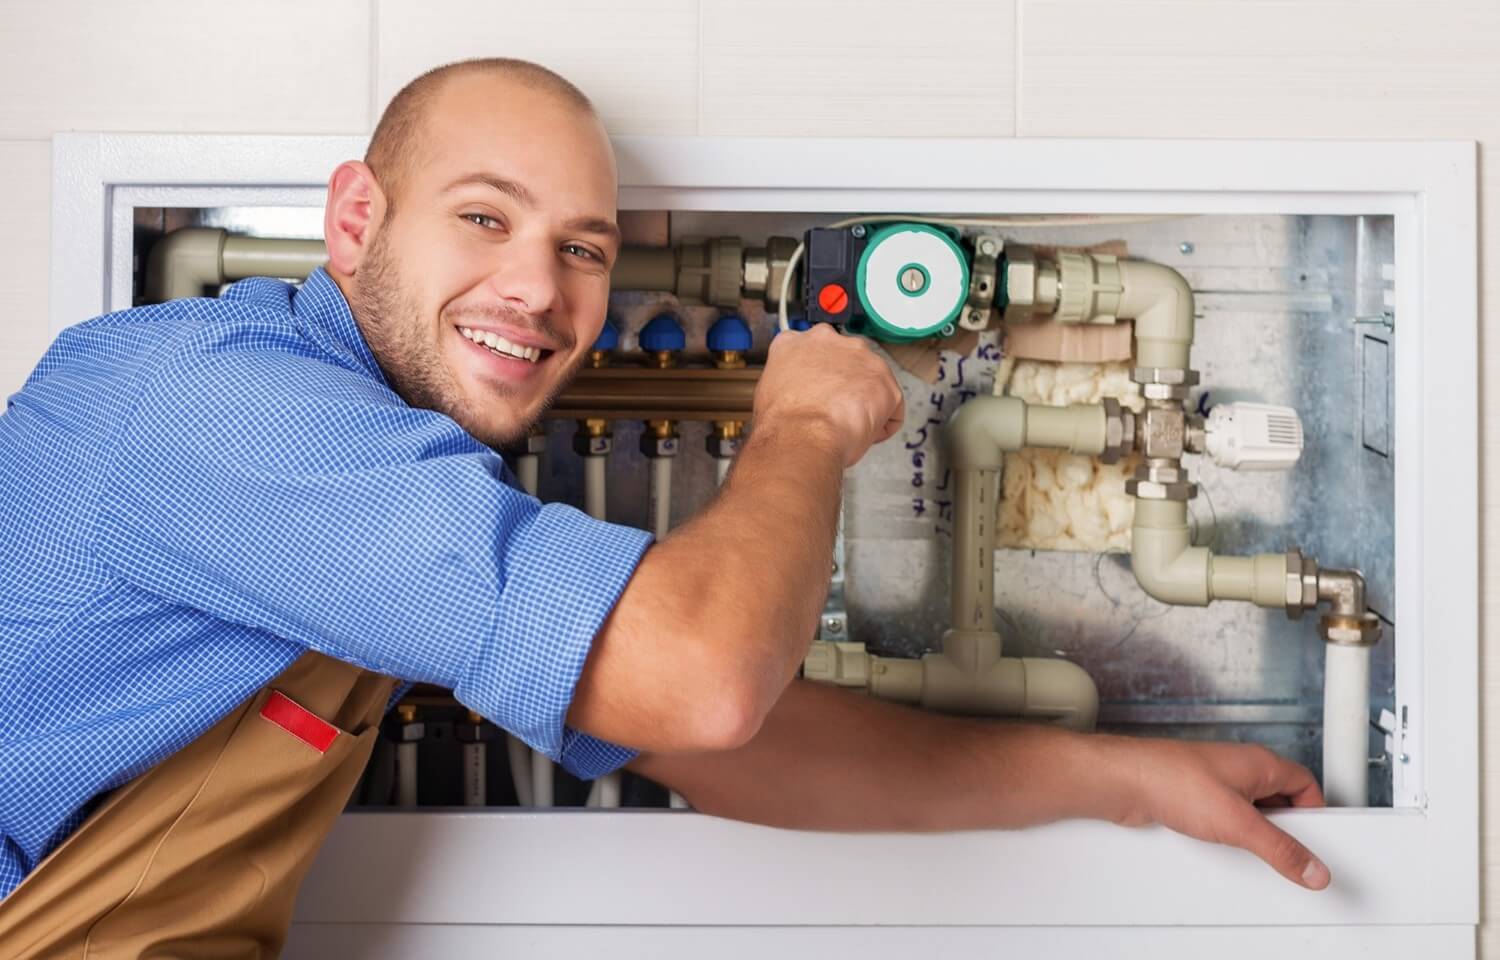 Plumbing Licensing Requirements from Texas